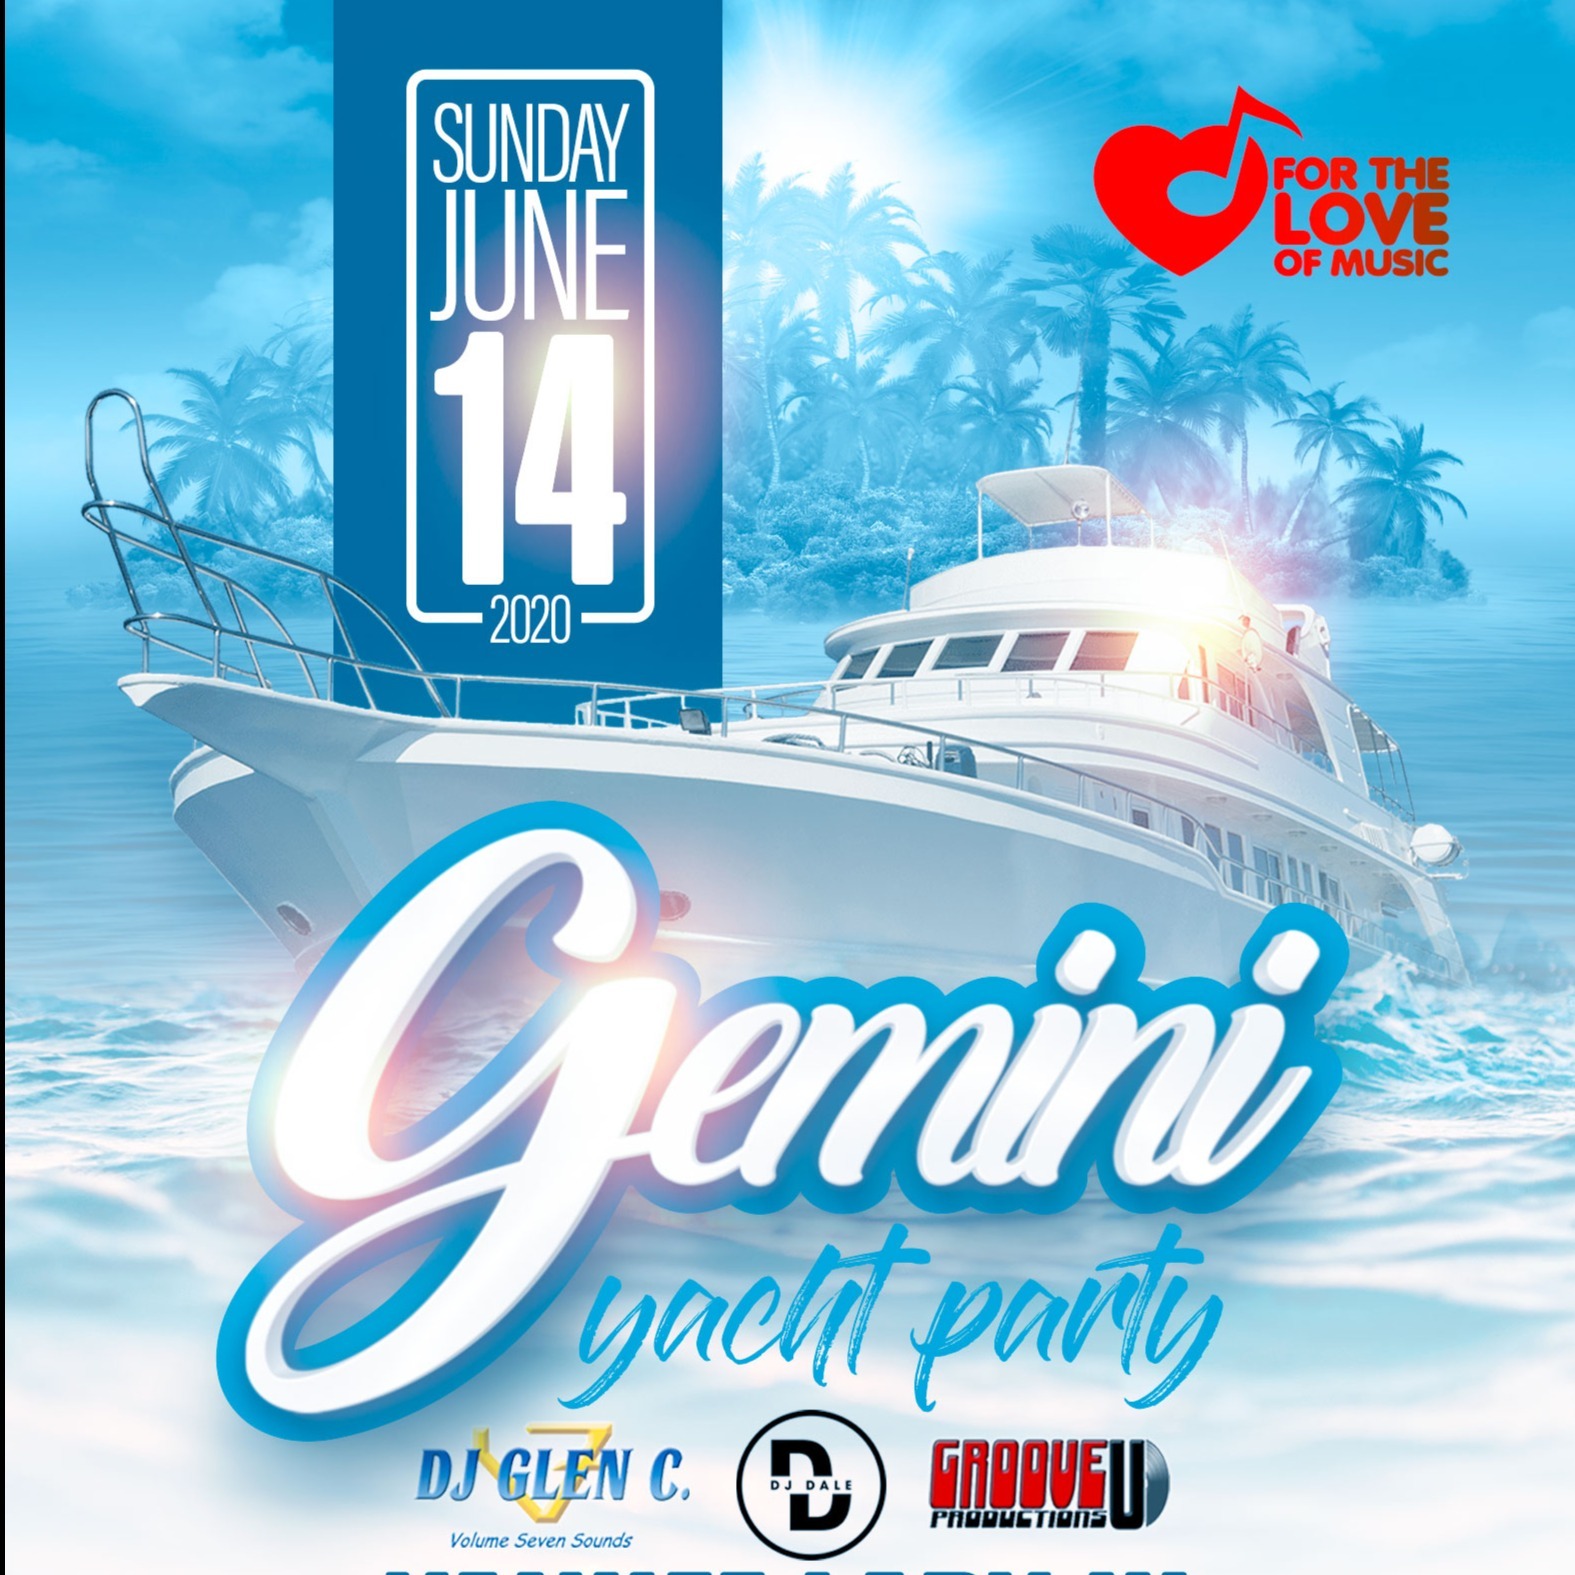 GEMINI YACHT PARTY - FOR THE LOVE OF MUSIC